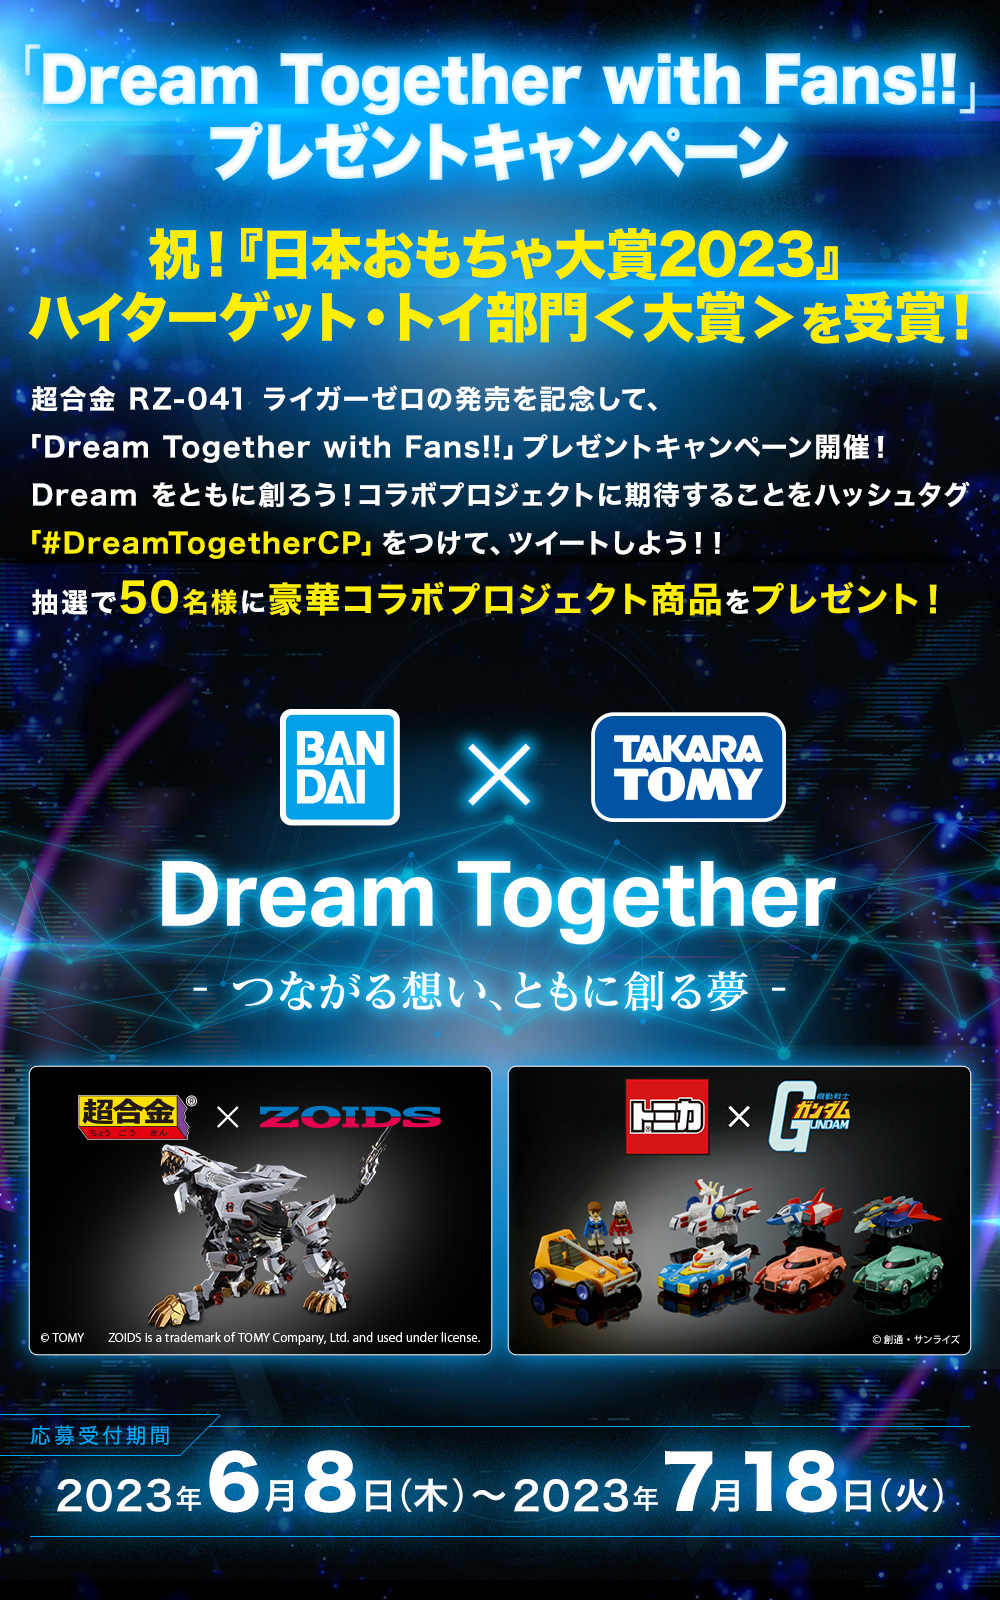 「Dream Together with Fans!!」プレゼントキャンペーンイメージ画像